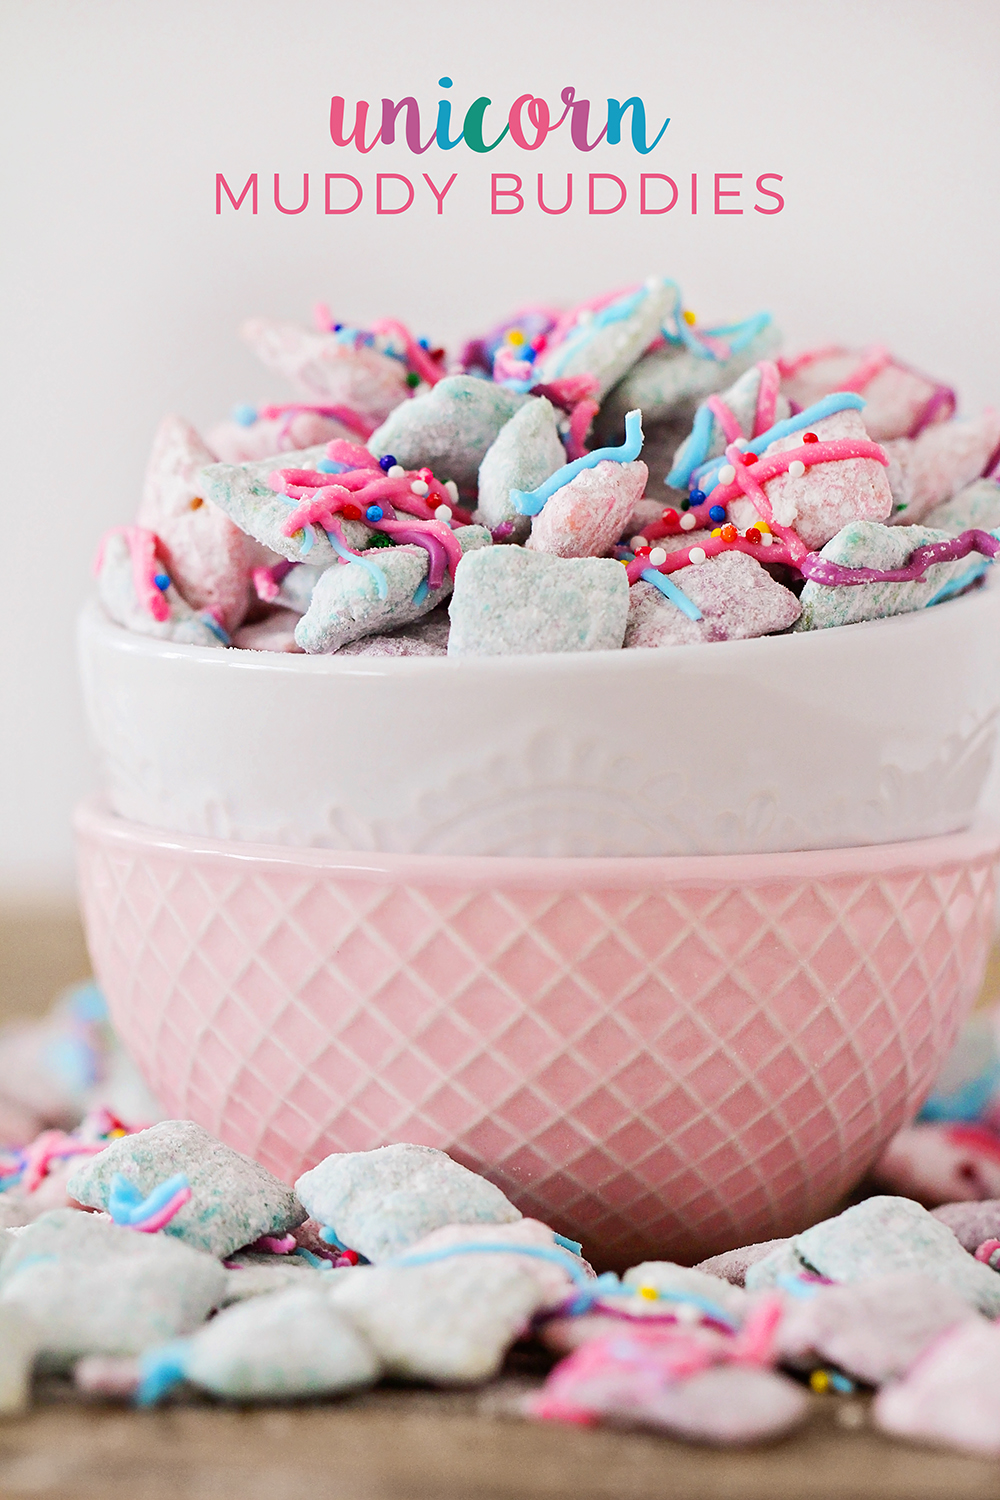 These unicorn muddy buddies are so whimsical and fun, and easy to make too! 